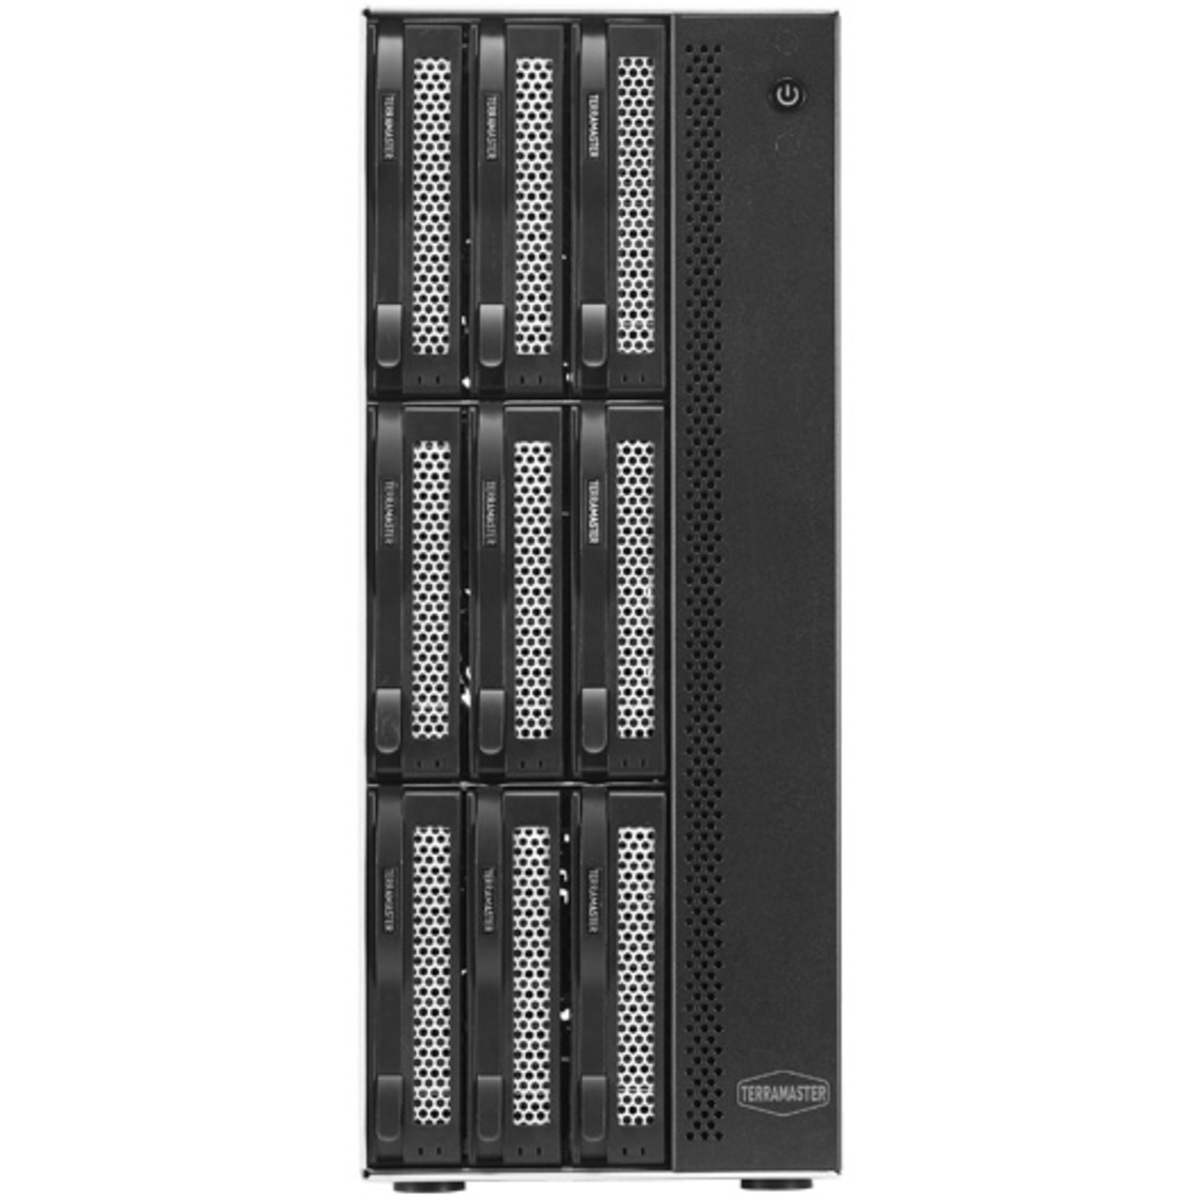 TerraMaster T9-423 36tb 9-Bay Desktop Multimedia / Power User / Business NAS - Network Attached Storage Device 6x6tb Western Digital Red Pro WD6003FFBX 3.5 7200rpm SATA 6Gb/s HDD NAS Class Drives Installed - Burn-In Tested T9-423